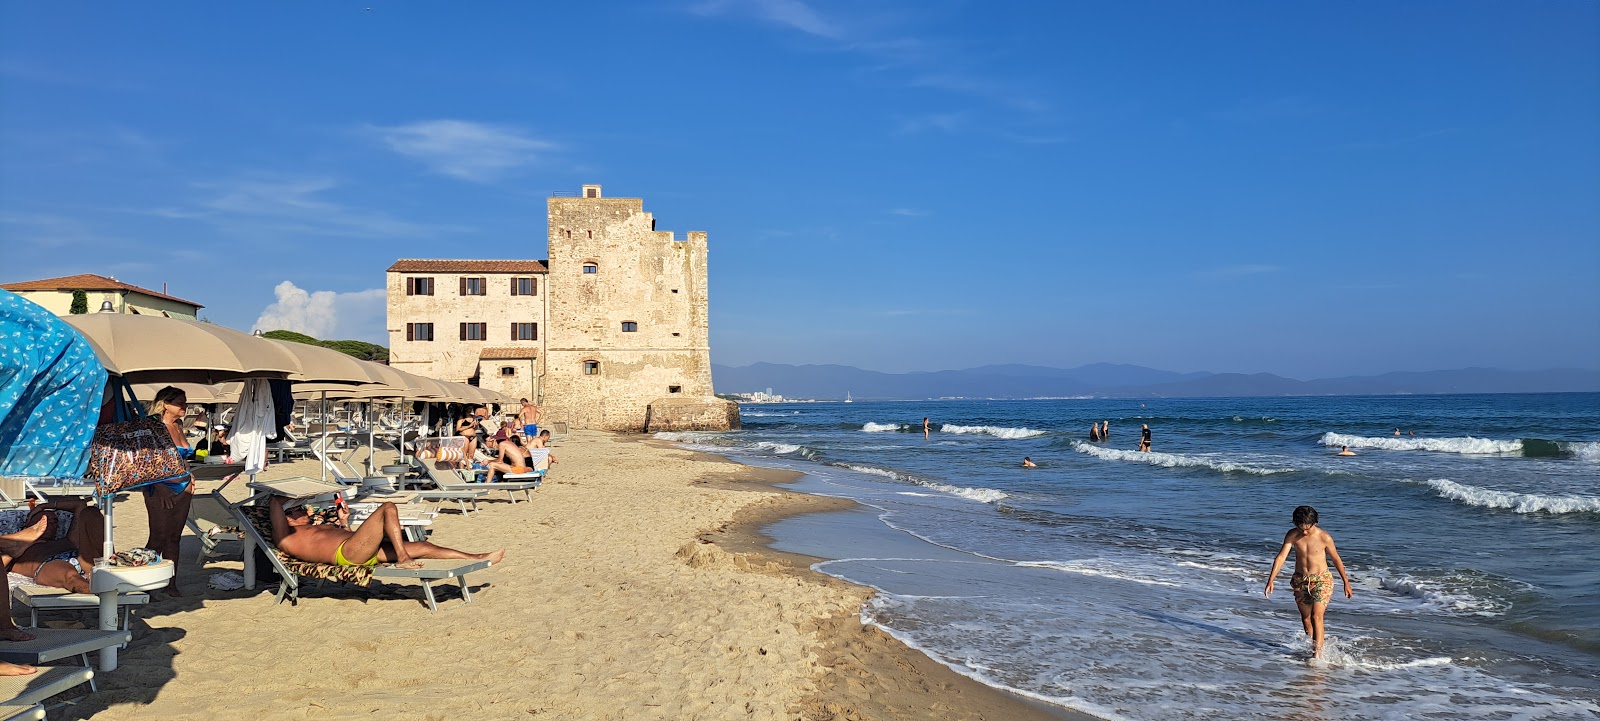 Photo of Spiaggia Libera di Torre Mozza with very clean level of cleanliness